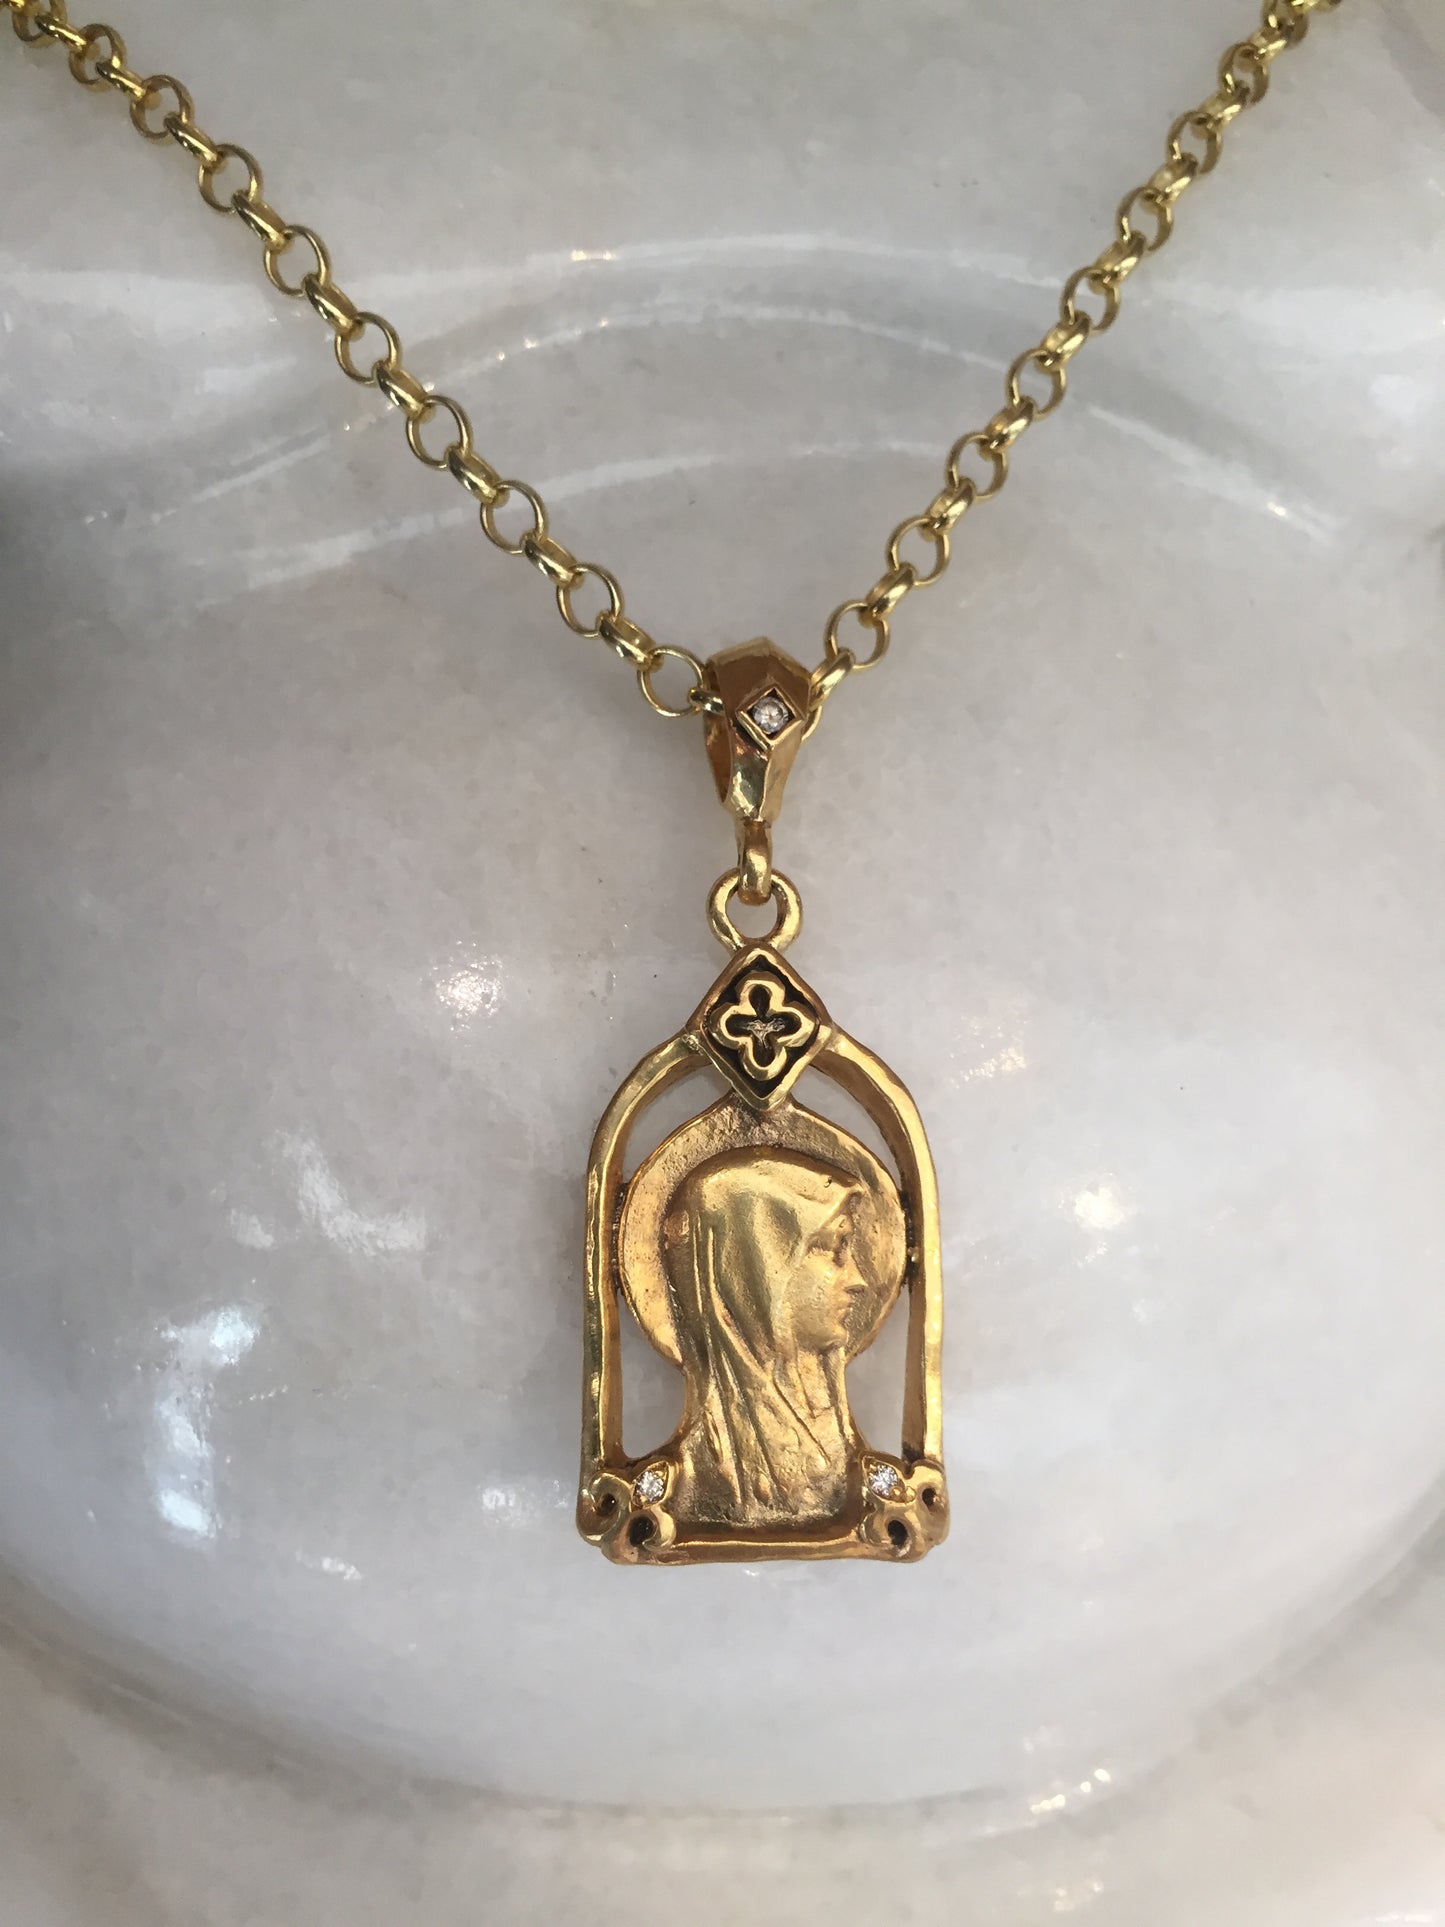 Necklace - Madonna in silver with 18k gold finish by Roman Paul